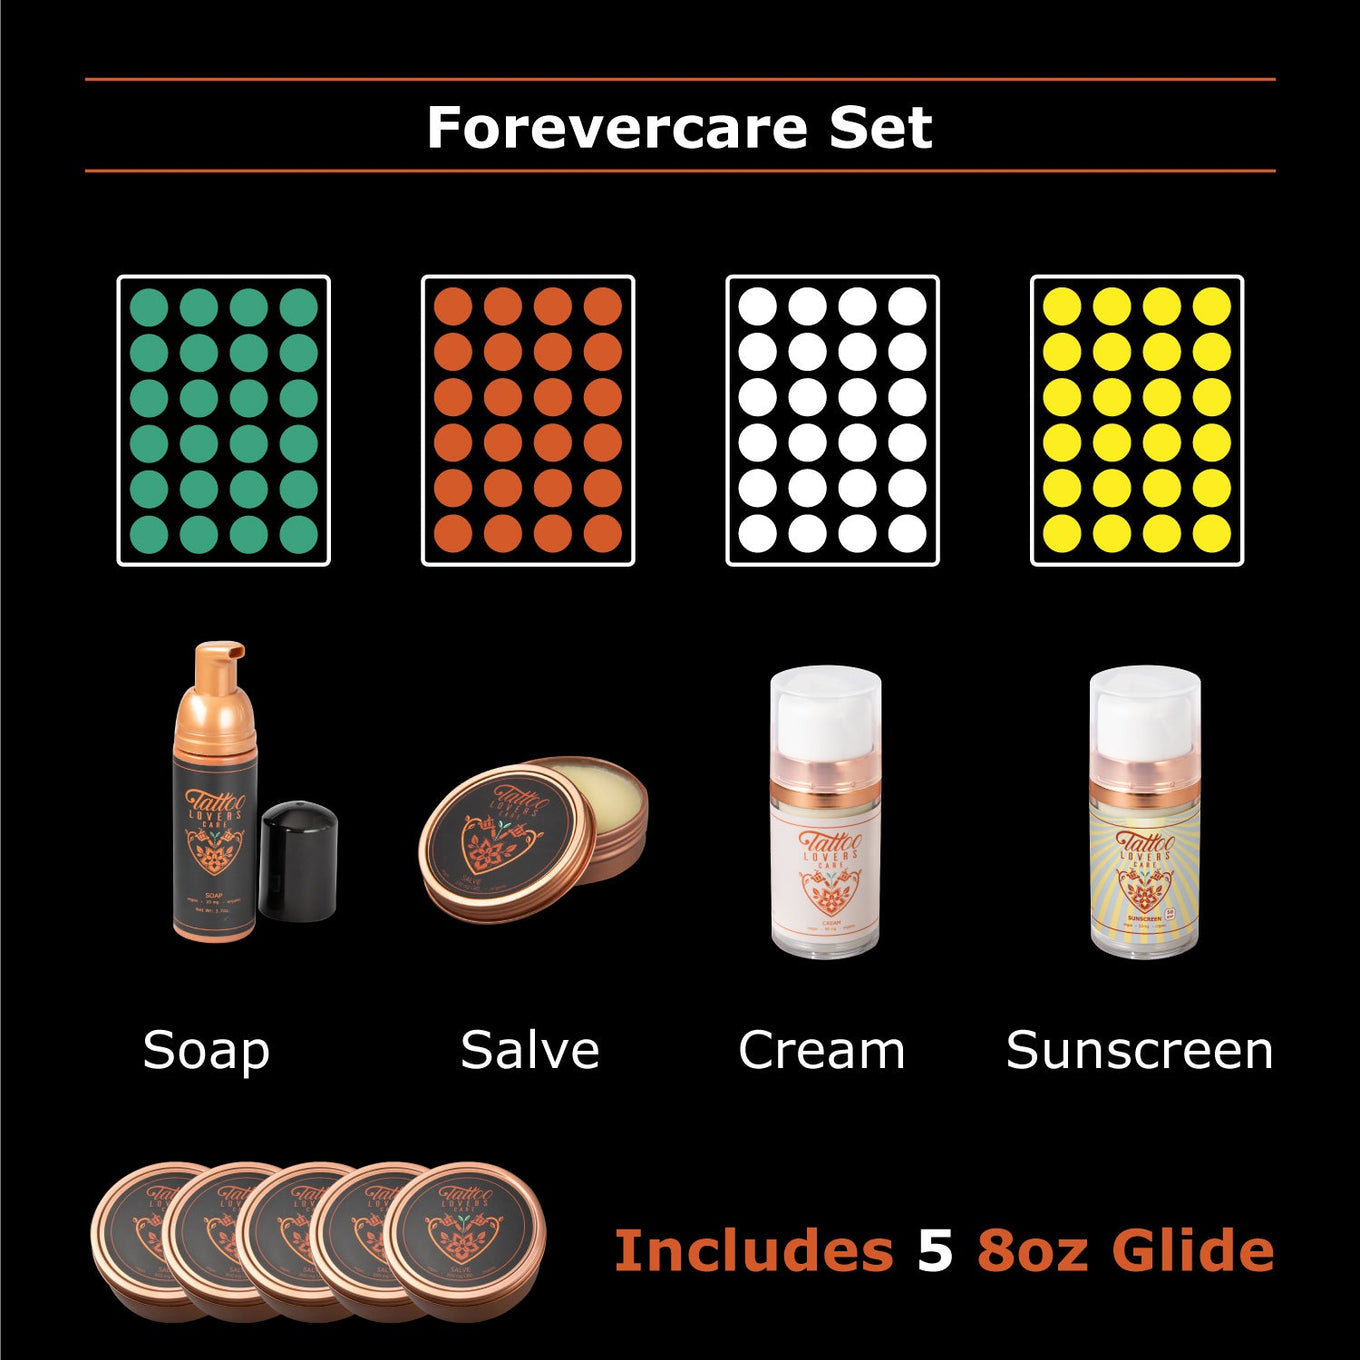 4 Cases - ForeverCare Set (Soap, Salve, Cream, and Sunscreen)